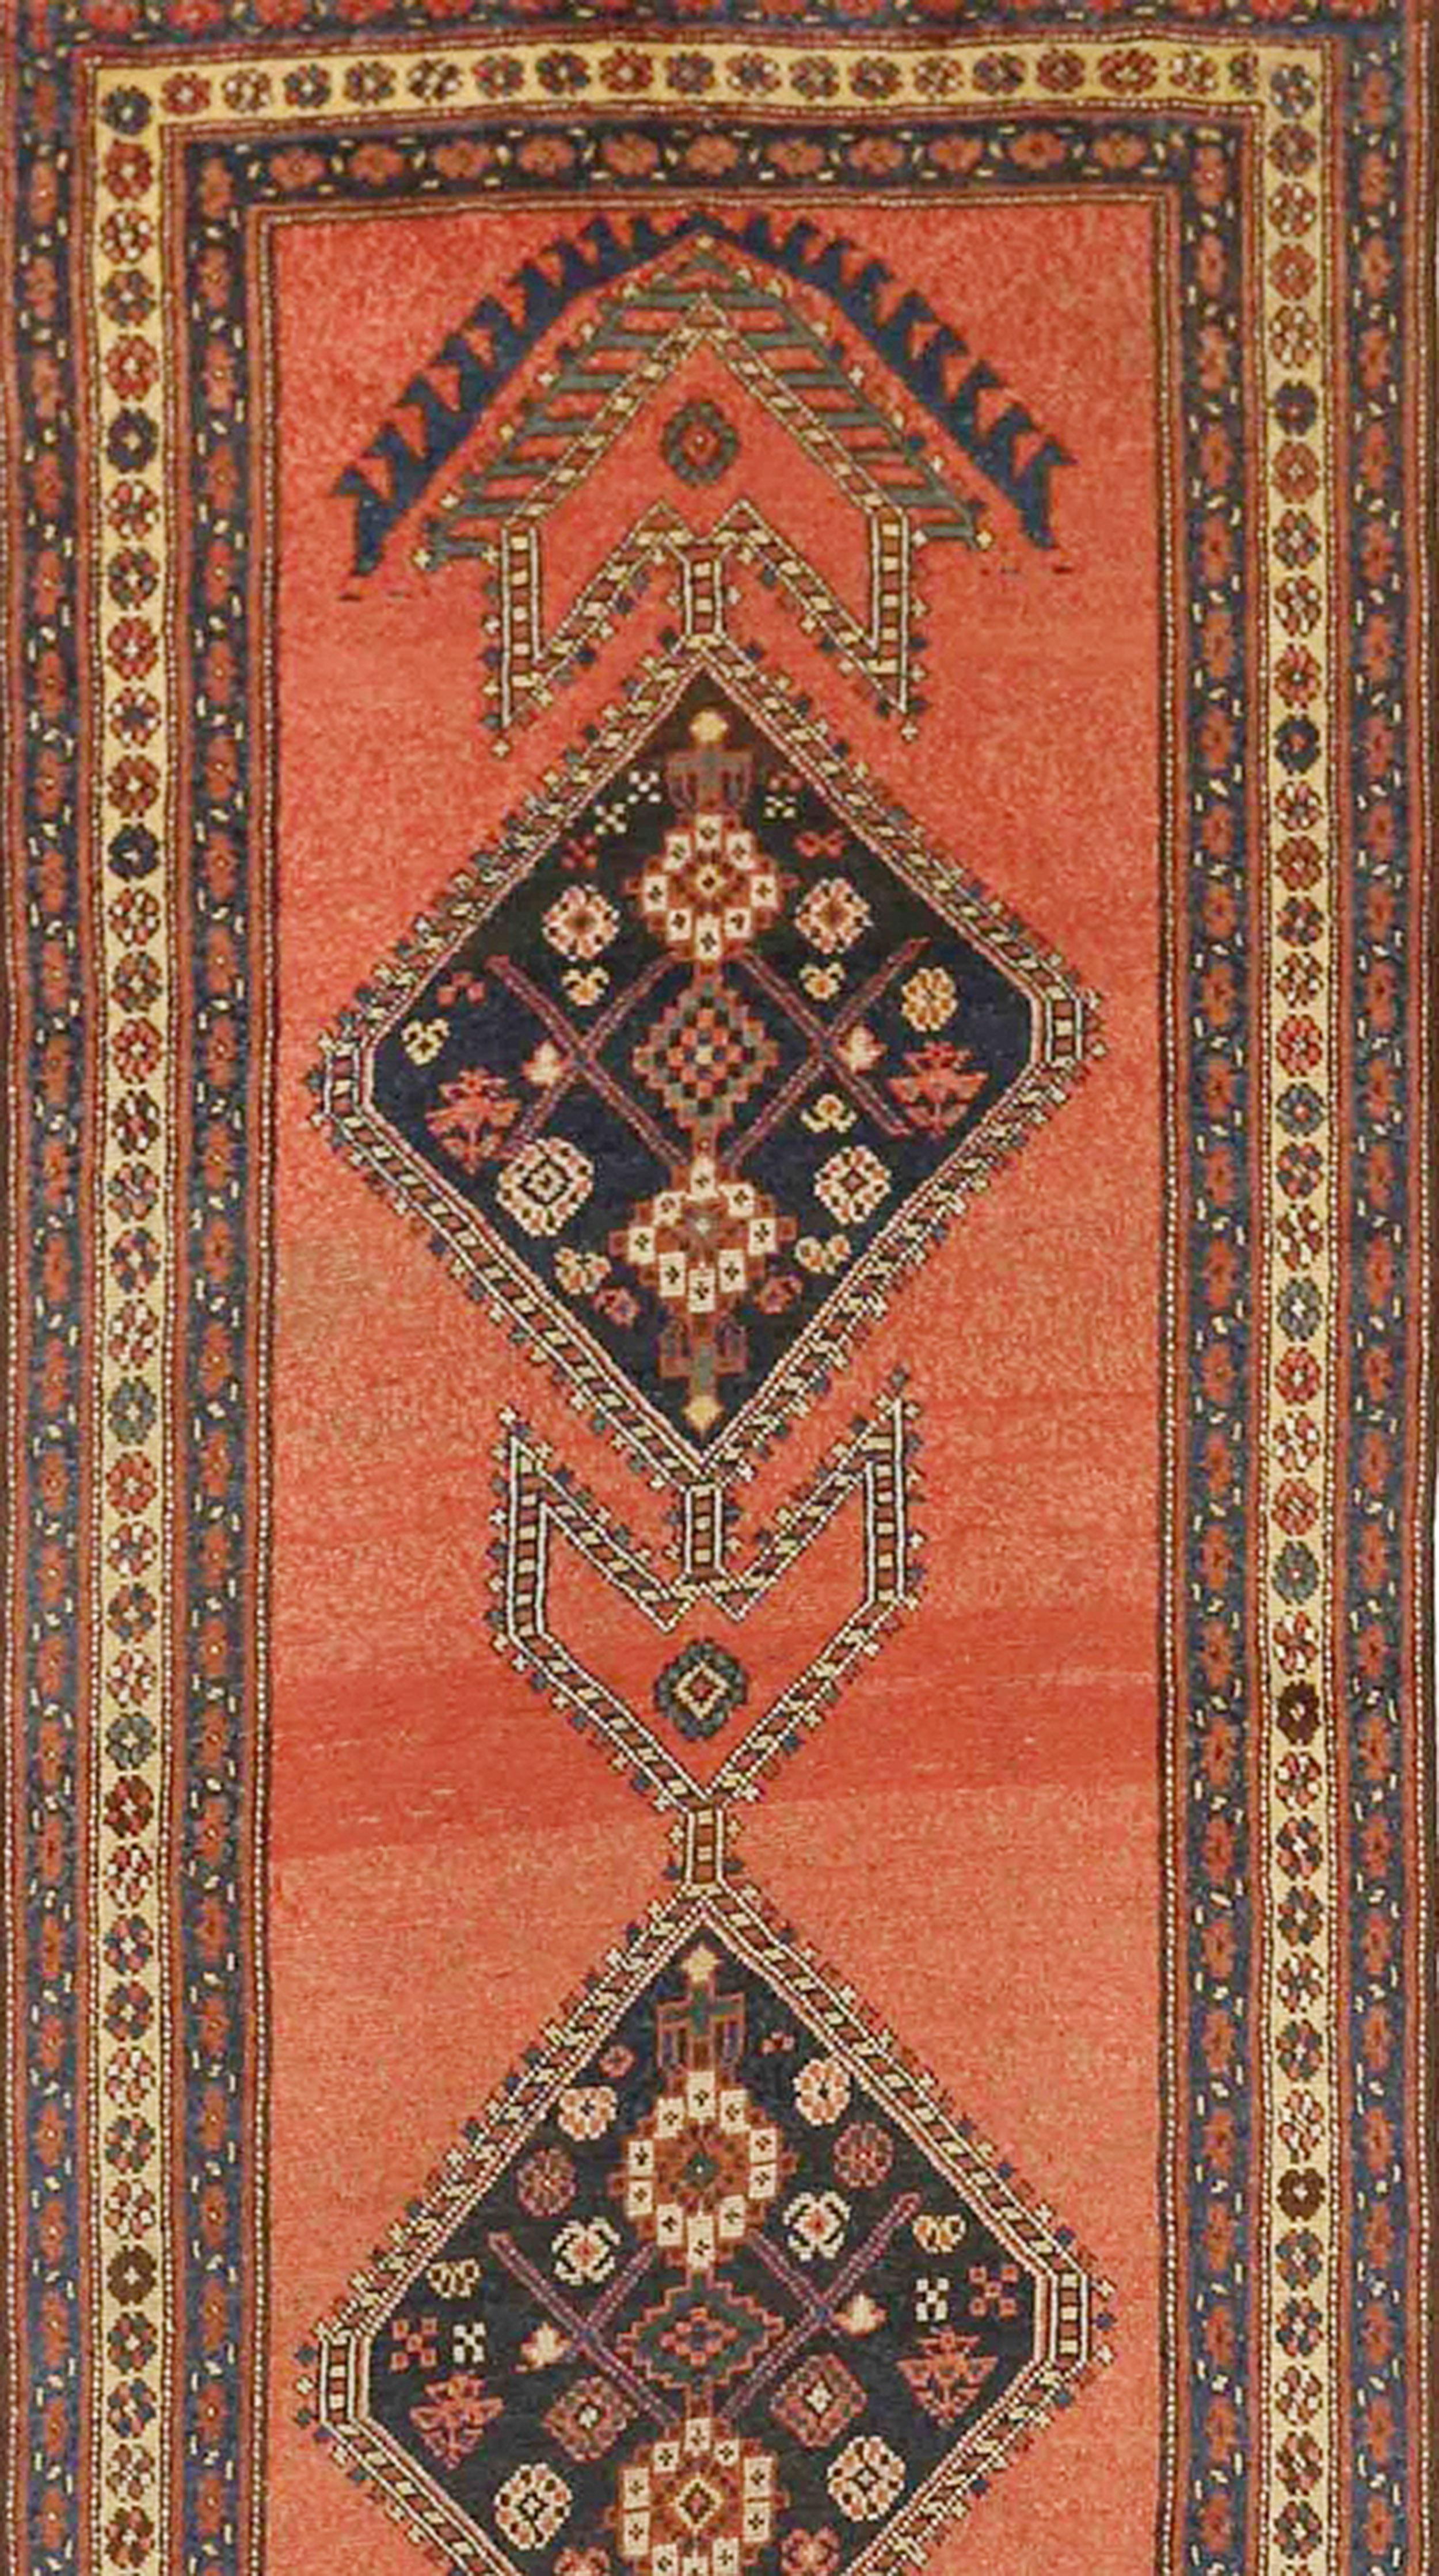 Antique Persian runner rug handwoven from the finest sheep’s wool and colored with all-natural vegetable dyes that are safe for humans and pets. It’s a traditional Bijar design featuring multicolored diamond medallions filled with floral details